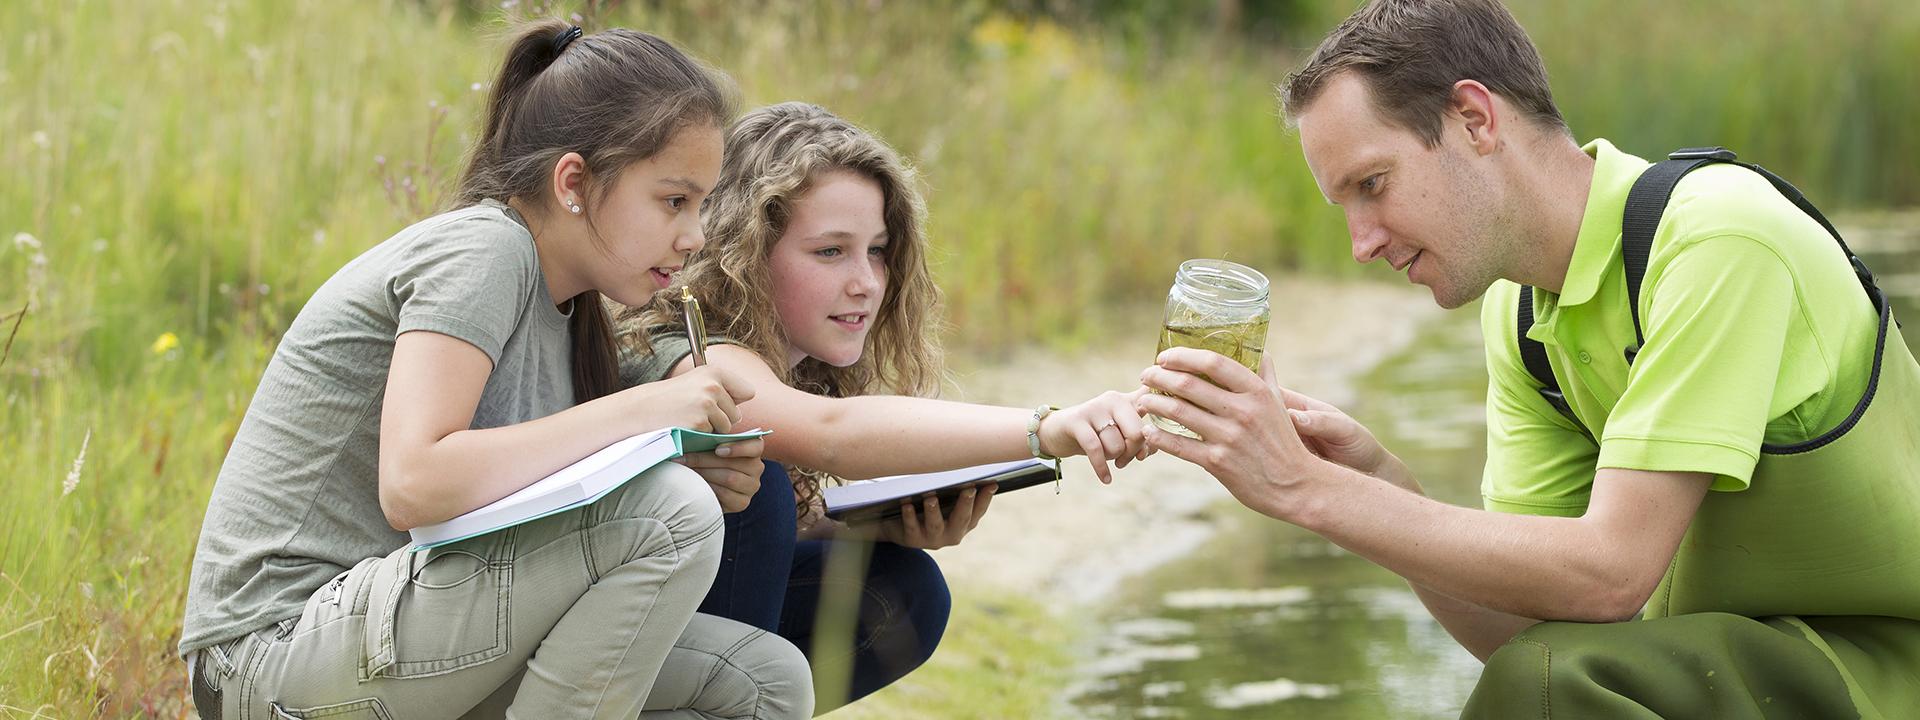 Three people engaged in an outdoor watershed activity, observing water quality